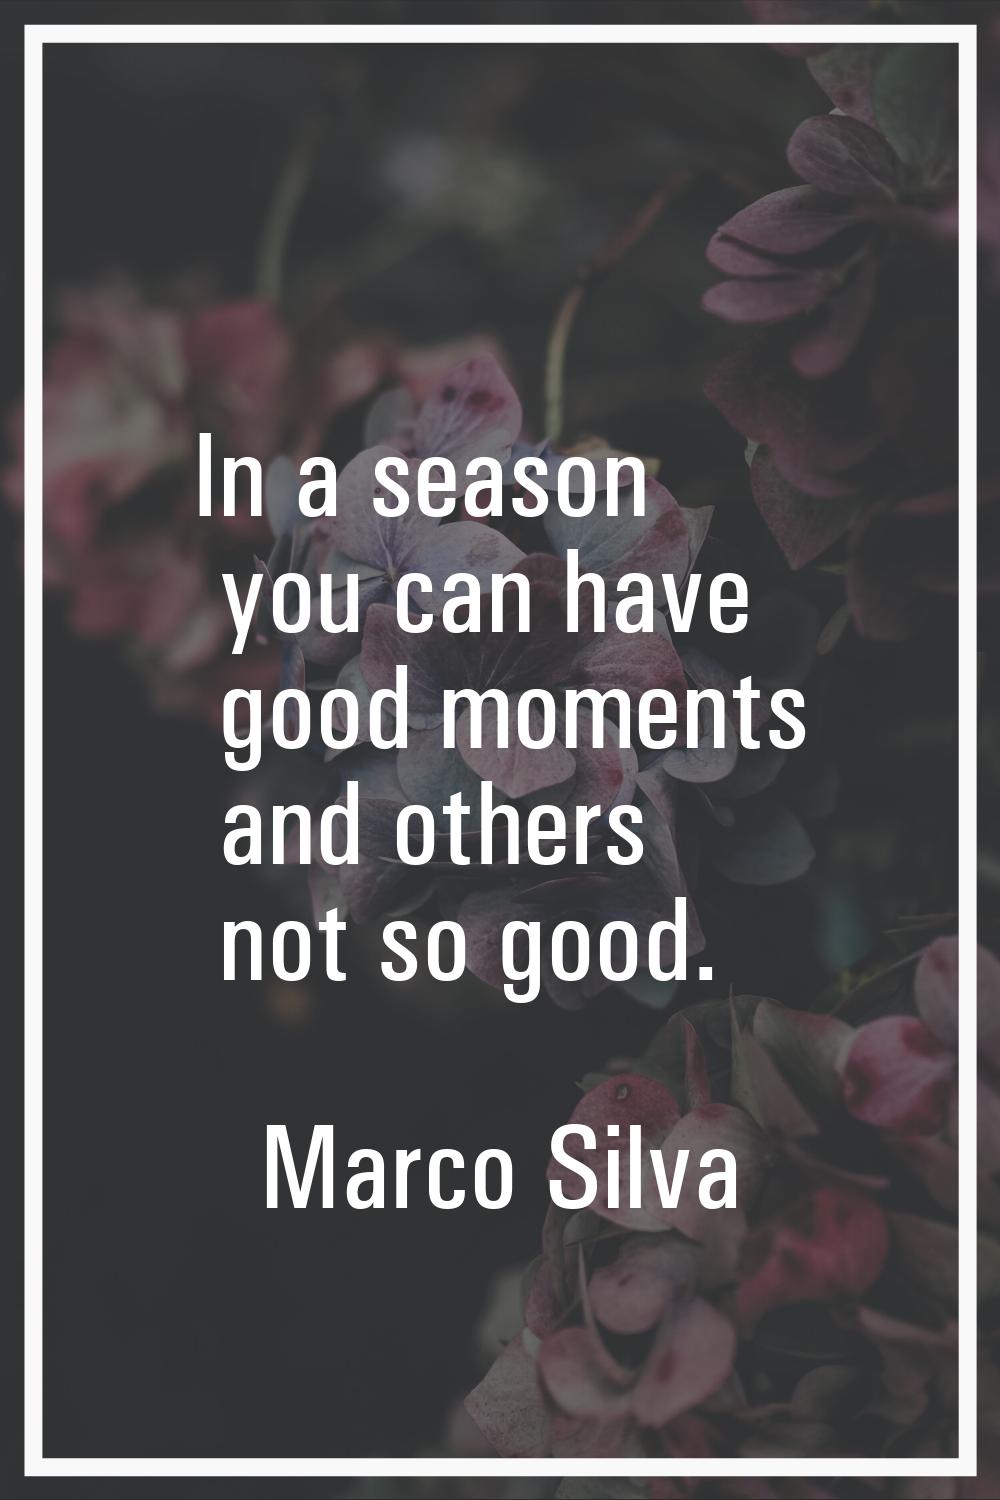 In a season you can have good moments and others not so good.